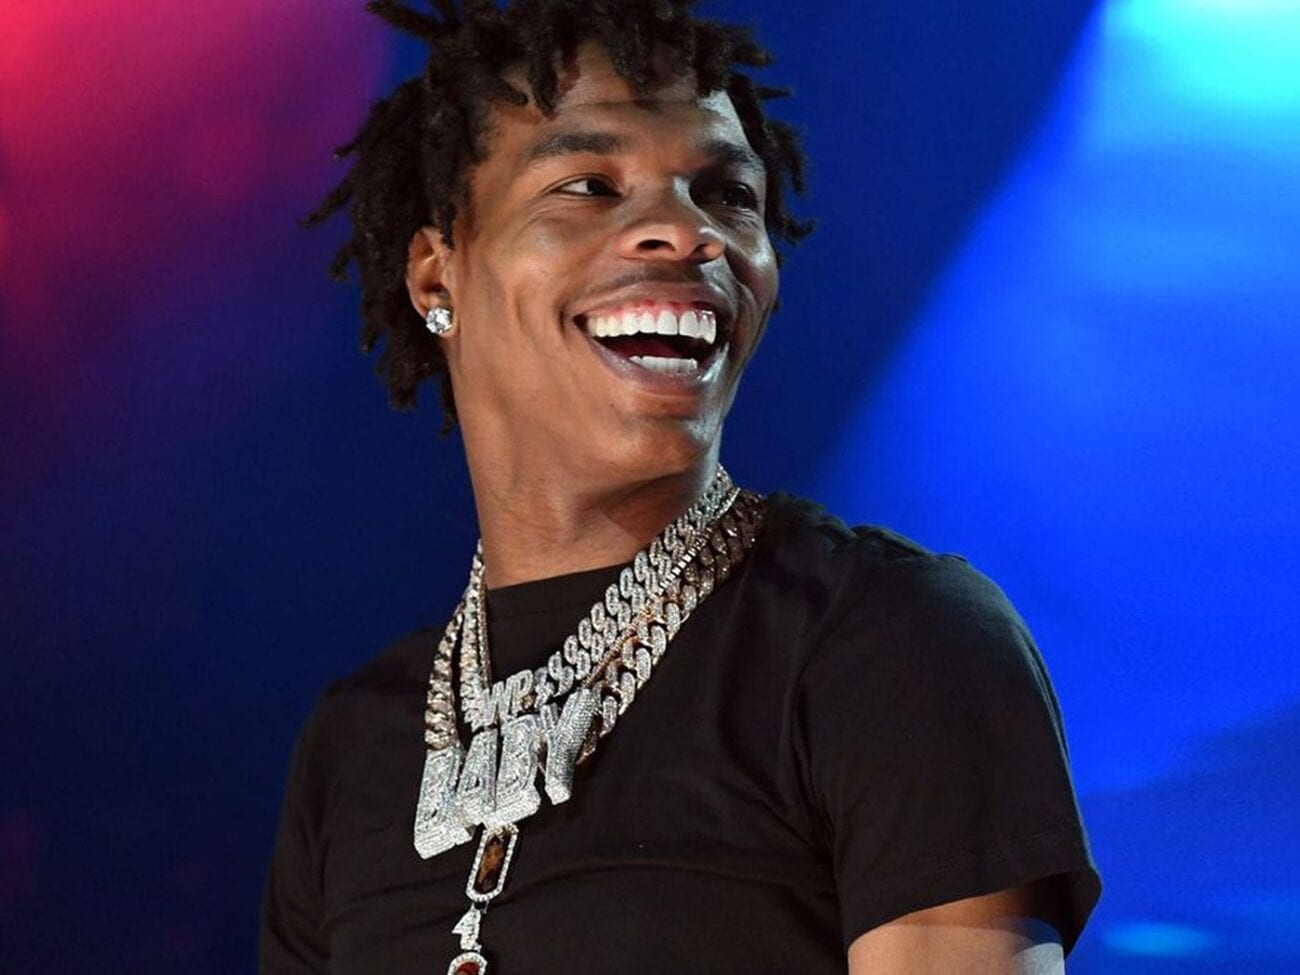 How rich is Lil Baby? See the rapper's shocking net worth right here